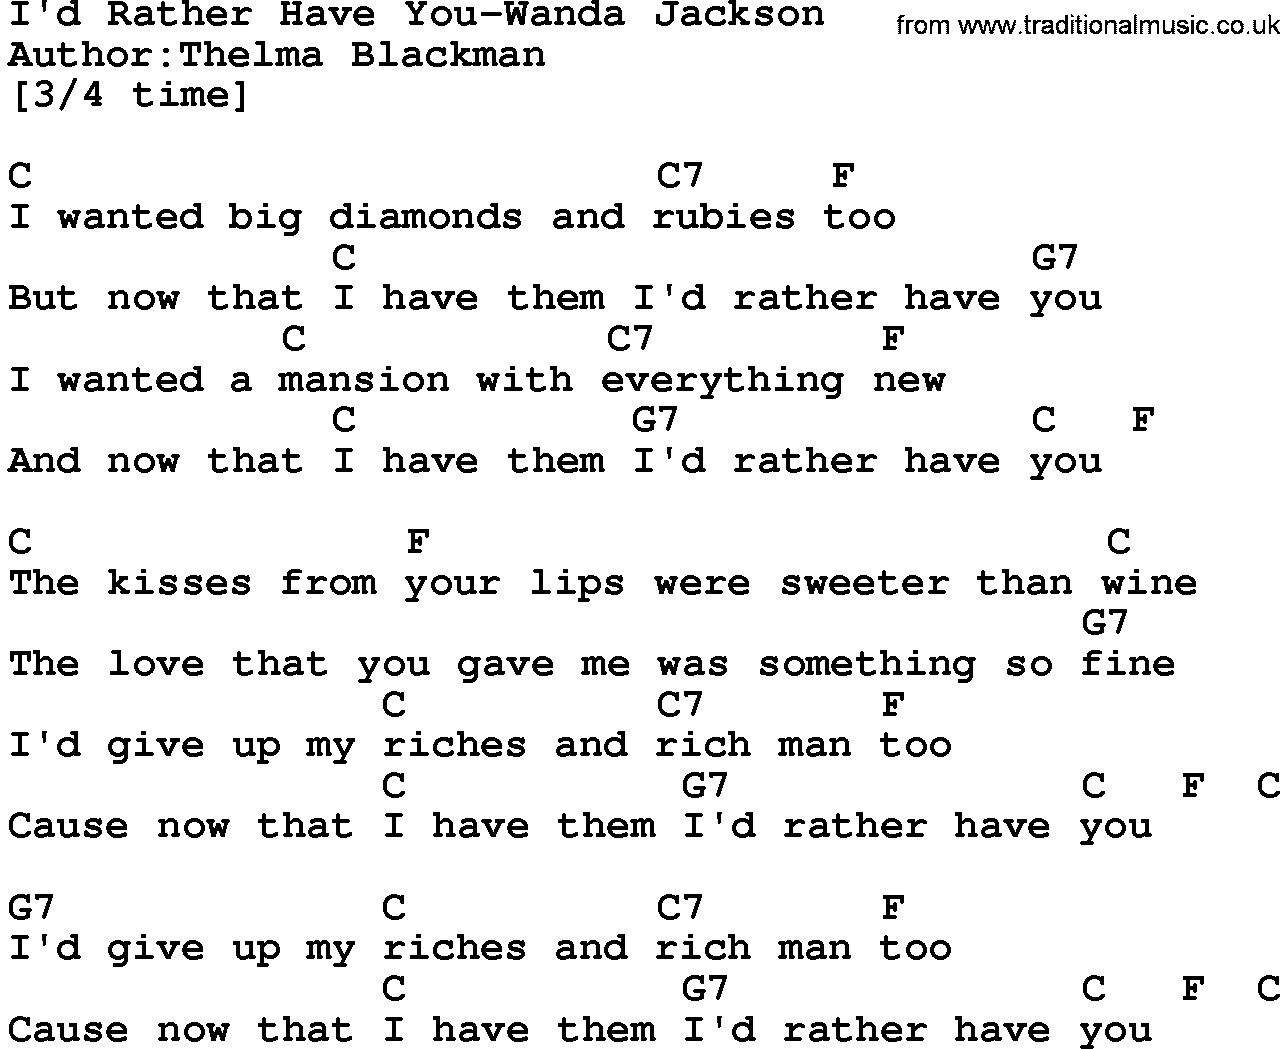 Country music song: I'd Rather Have You-Wanda Jackson lyrics and chords